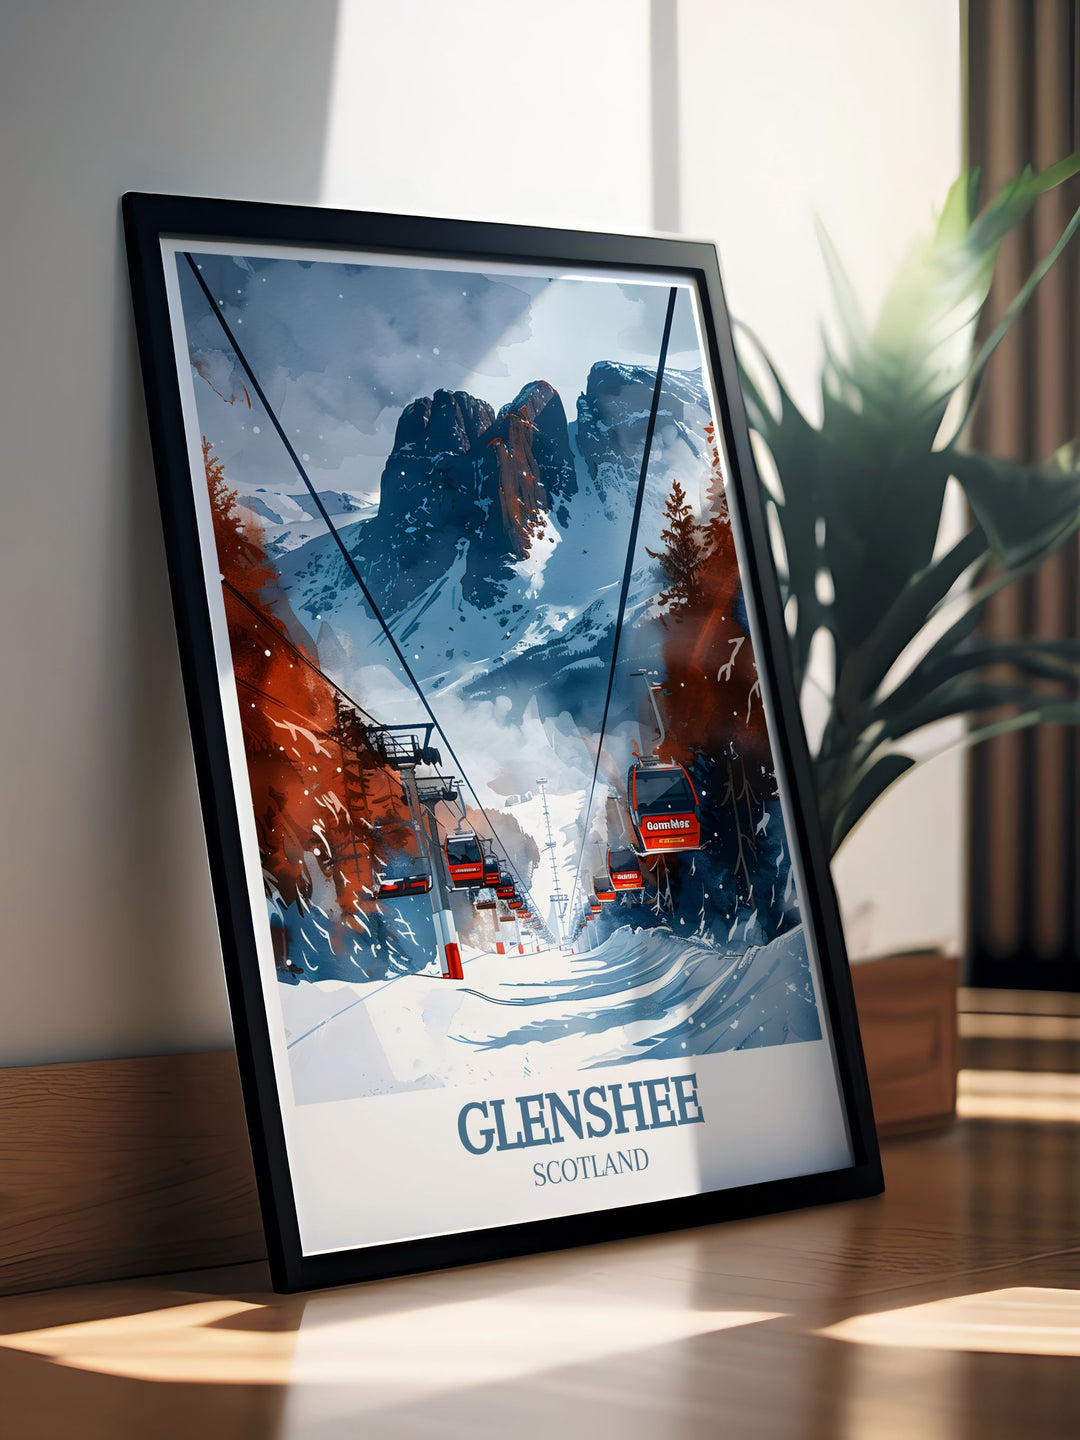 Showcasing the tranquil beauty of the Grampian Mountains, this poster is perfect for those who appreciate serene landscapes. The detailed illustrations highlight the mountains majestic peaks and scenic vistas, bringing a piece of the Scottish Highlands into your home.